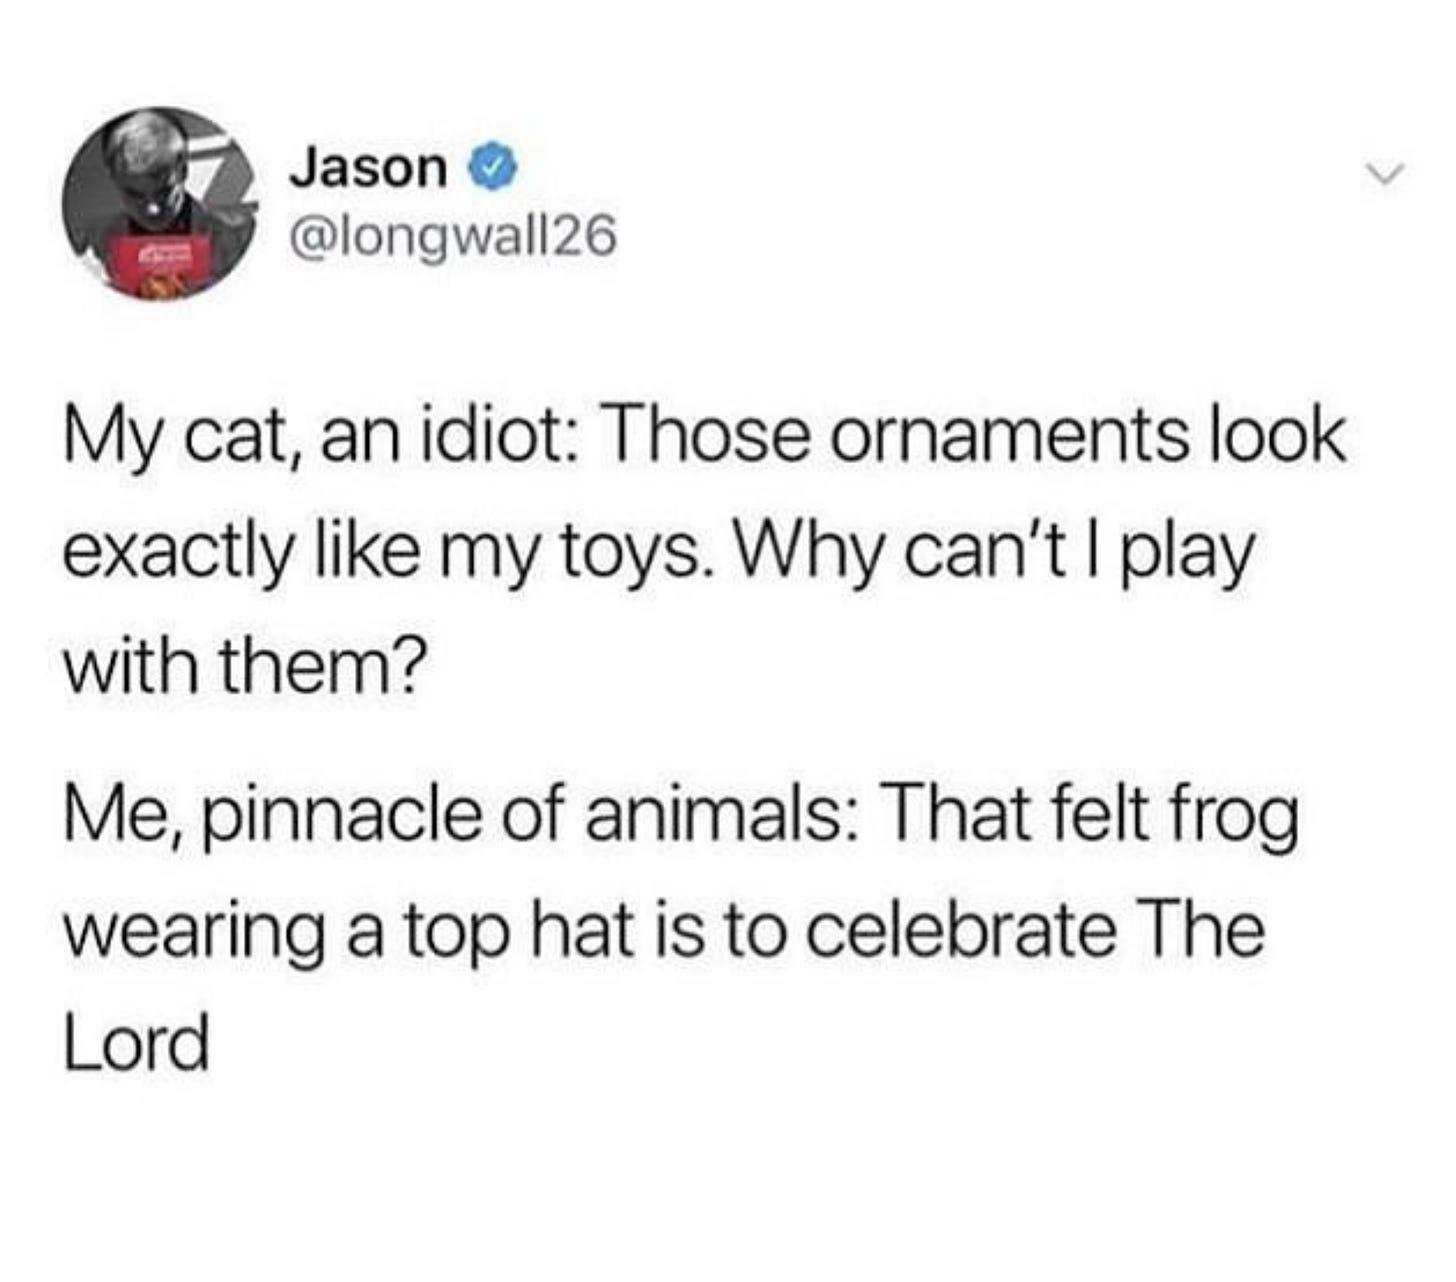 my cat, an idiot: Those ornaments look exactly likemy toys. Why can't I play with them? Me, pinnacle of animals: That felt frog wearing a top hat is to celebrate The Lord. [a tweet]